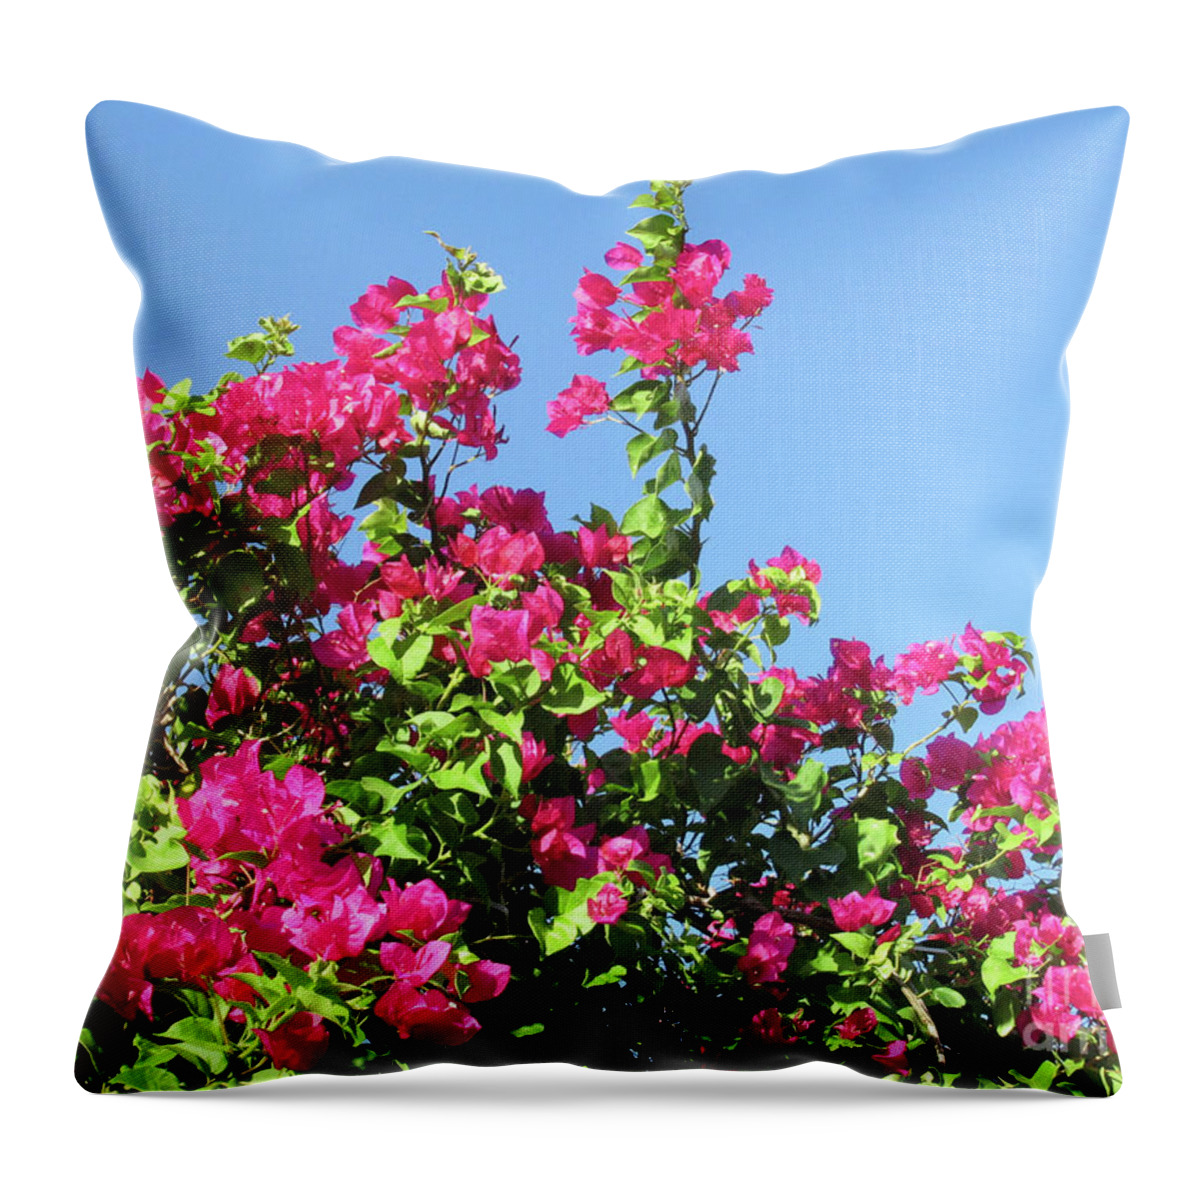 Bougainvillea Throw Pillow featuring the photograph Bougainvillea 1 by Randall Weidner